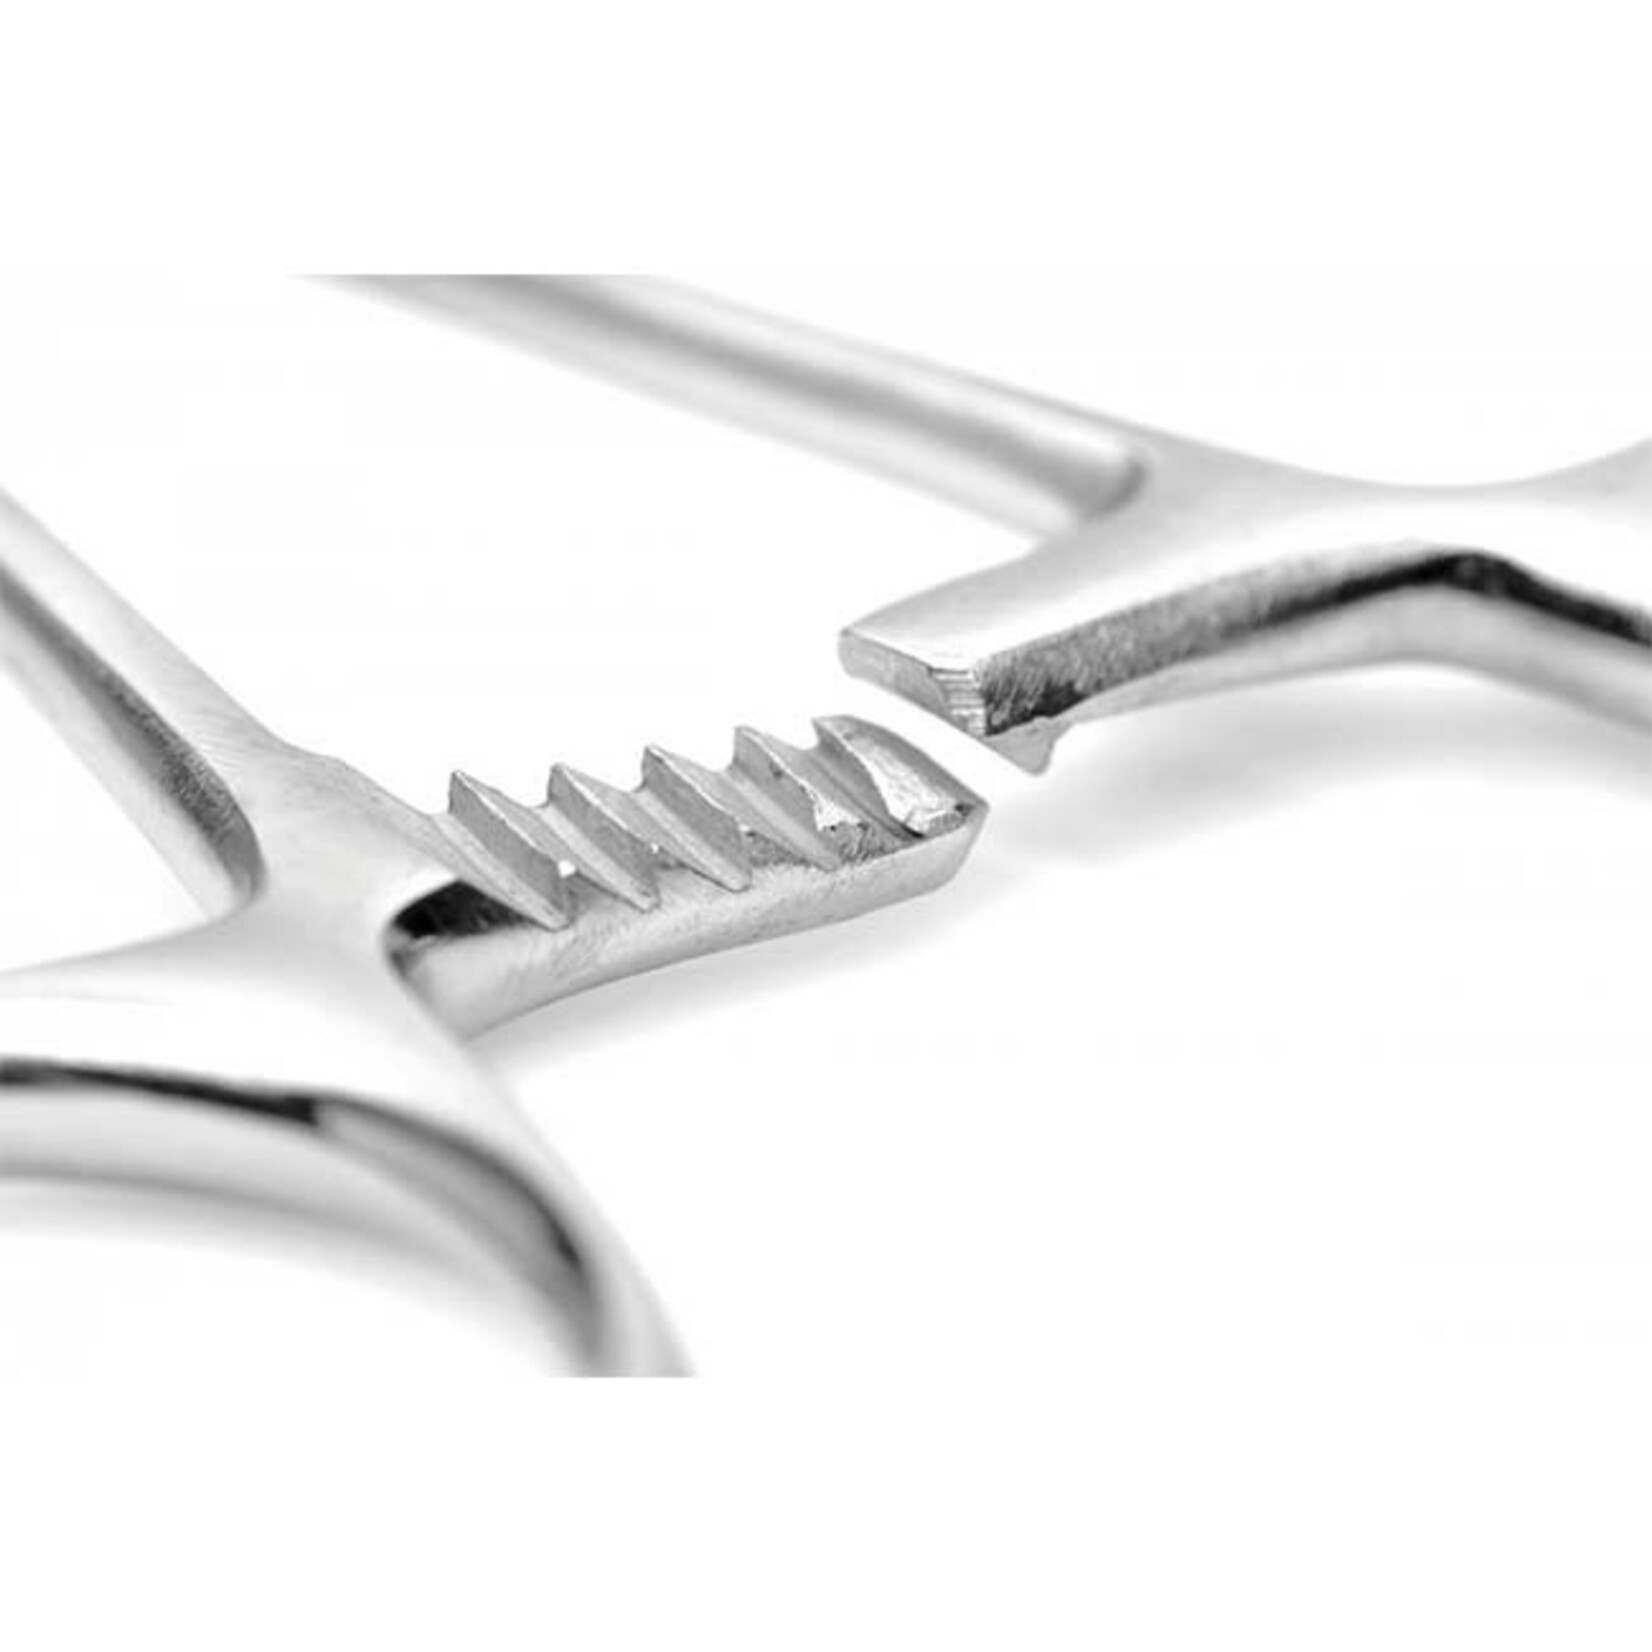 Mistress by Isabella Sinclaire Mistress by Isabella Sinclaire Young Forceps